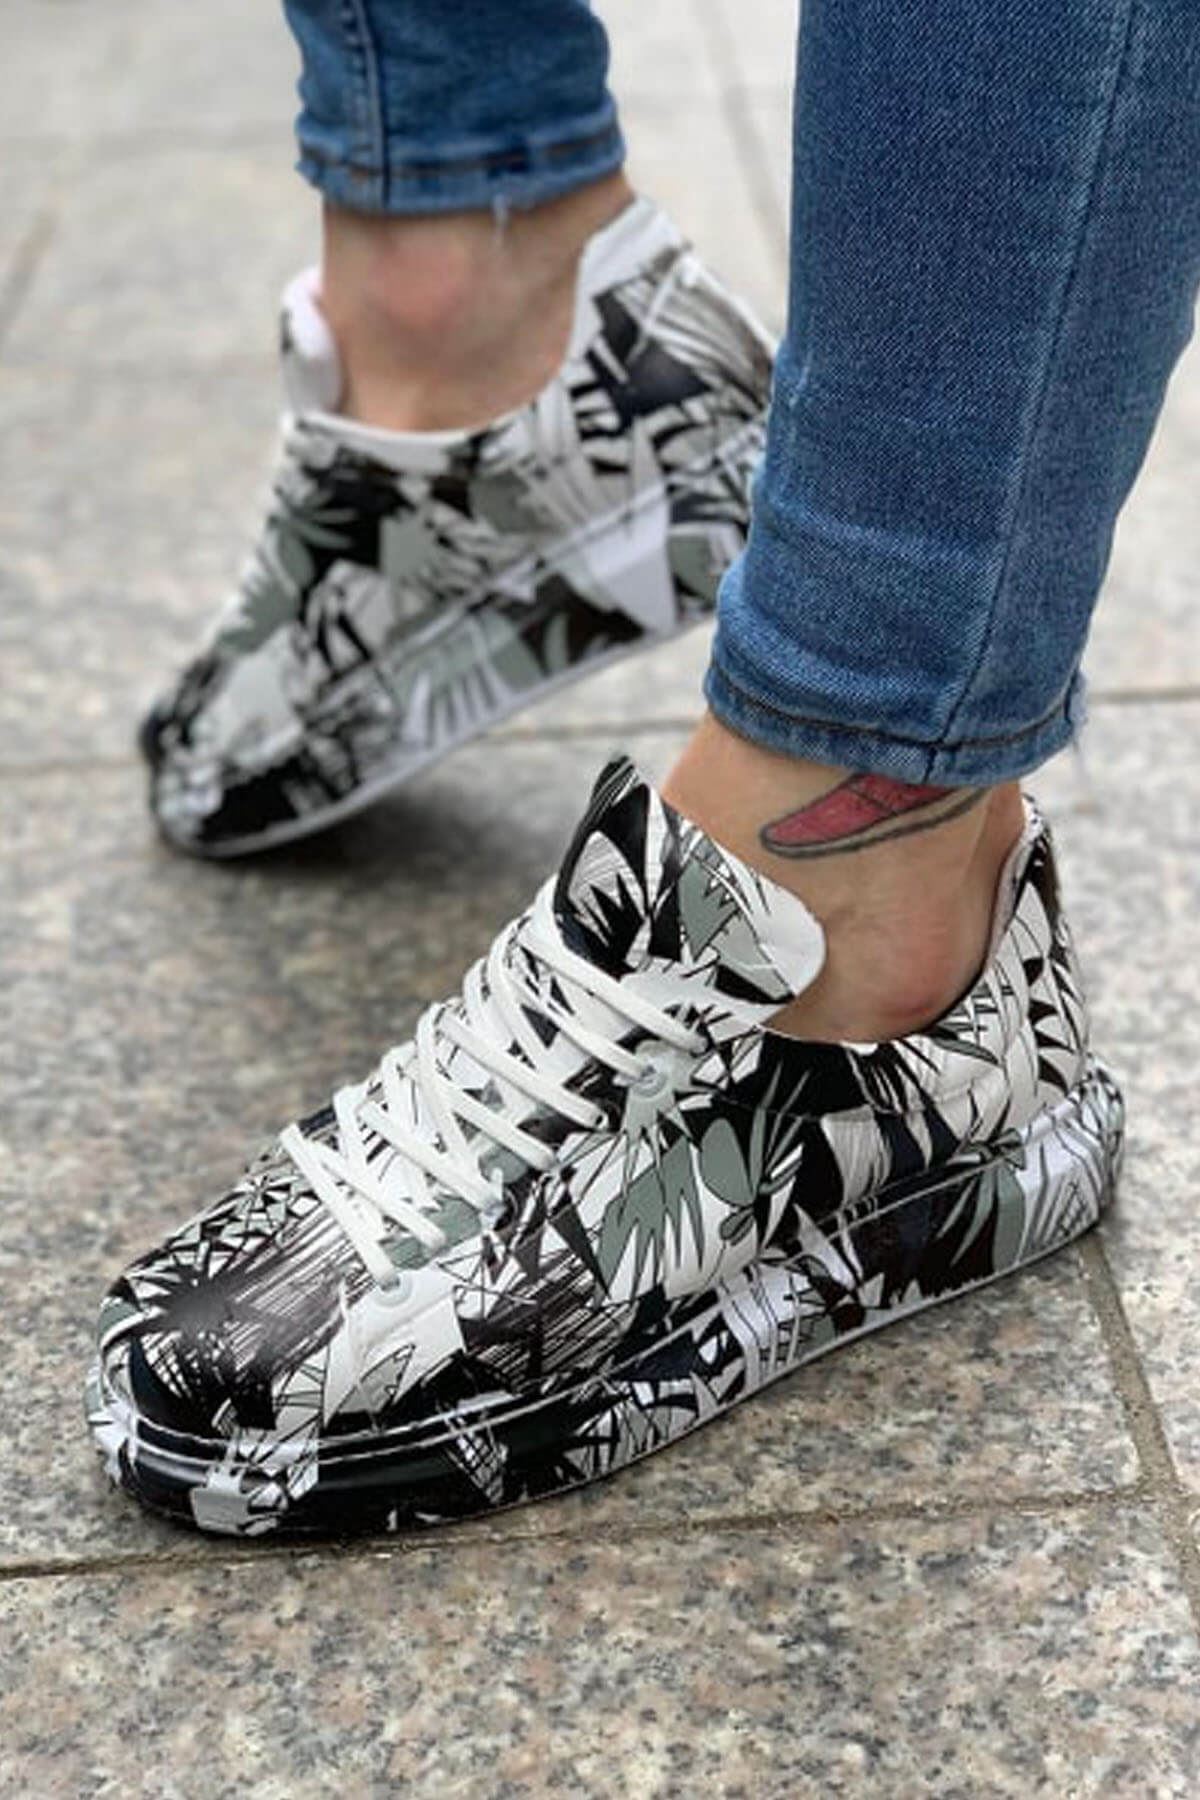 Chekich Men's & Women's Shoes Colorful Pattern on White Artificial Leather Mixed Color Lace Up Print Spring Summer Seasons Unisex Casual Sneakers Street Fashion Daily Odorless High Base Light Skateboard Adult CH255 V9